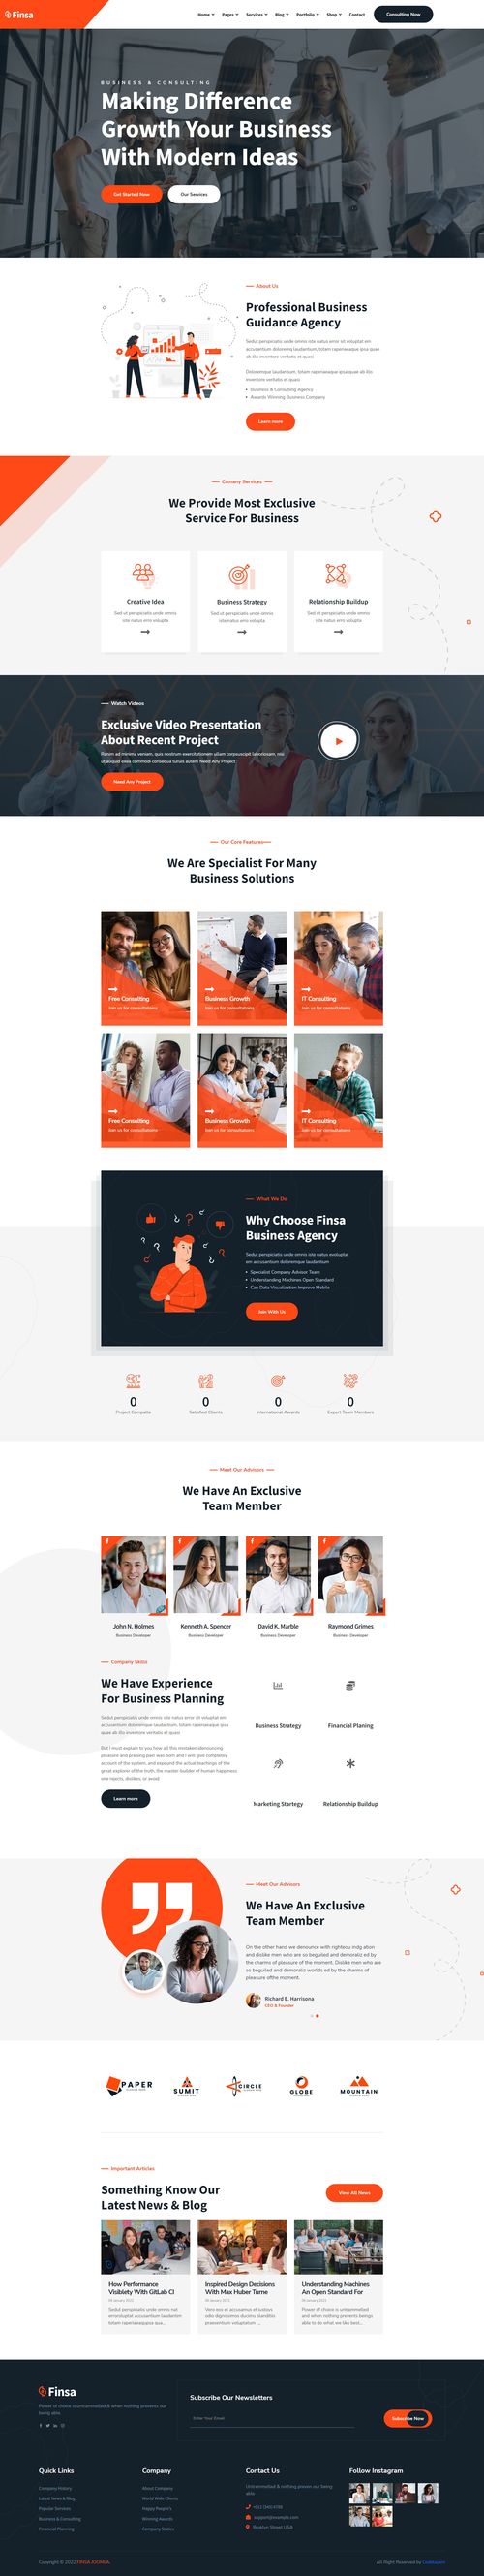 Finsa - Joomla Template for Consulting, Finance, Business